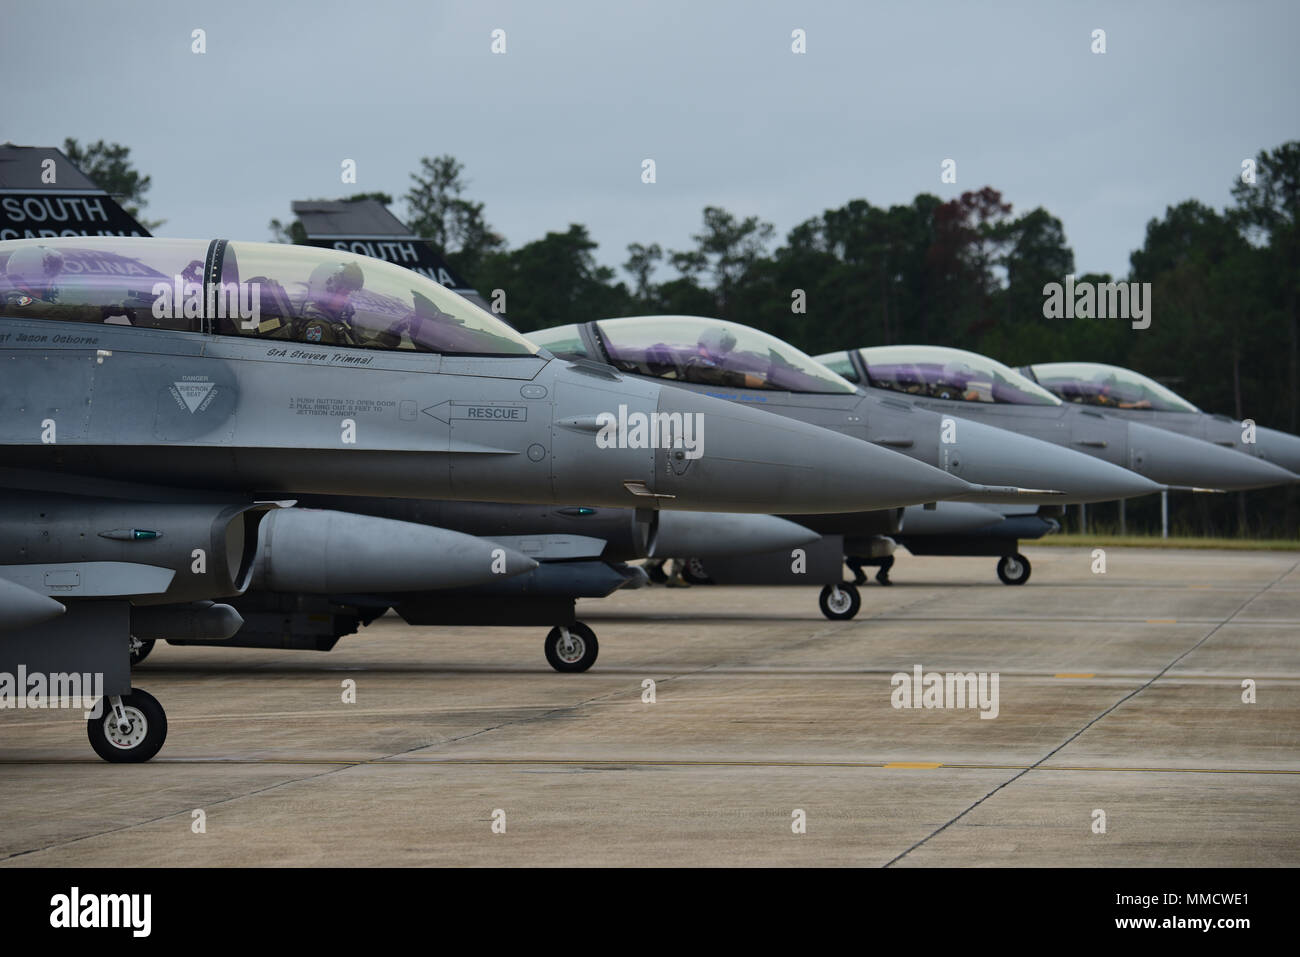 U.S. Air Force F-16 fighter jets from the South Carolina Air National Guard’s 169th Fighter Wing prepare for takeoff during end-of-runway operations at McEntire Joint National Guard Base, S.C., Oct. 14, 2017. This was part of routine training ensuring that the SCANG remains ready to accomplish the mission at a moment’s notice. (U.S. Air National Guard photo by Senior Airman Megan Floyd) Stock Photo